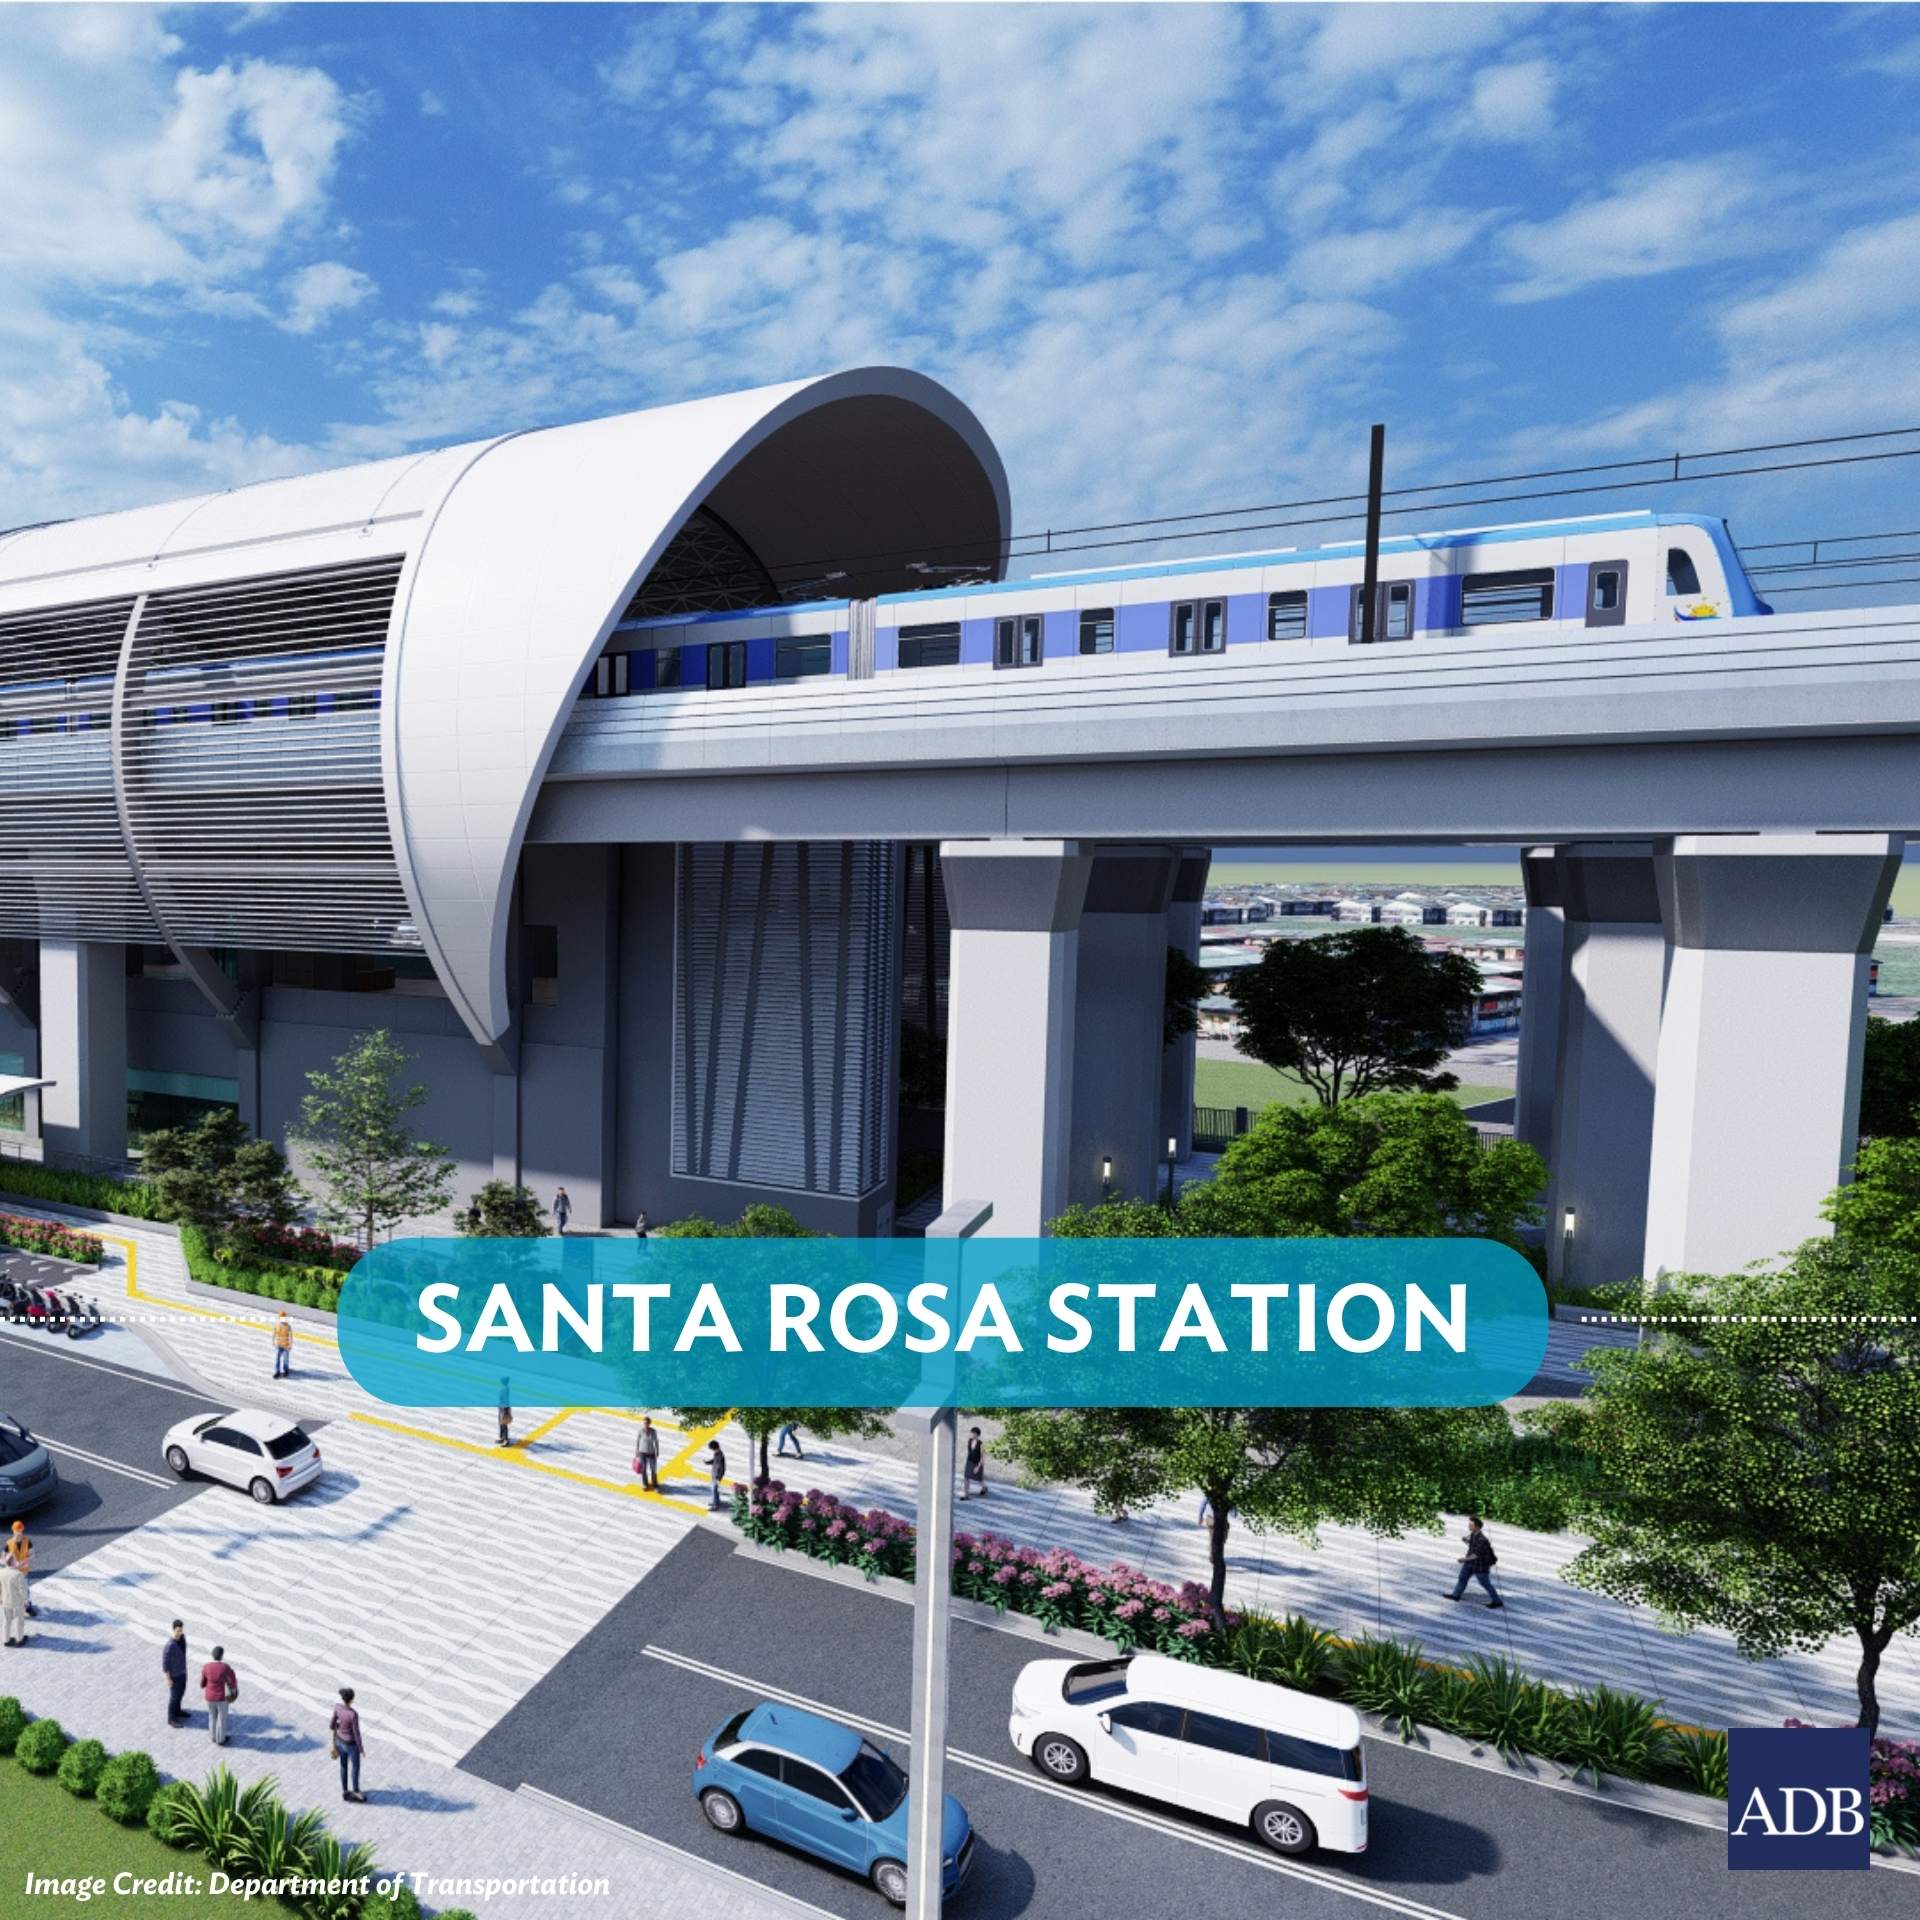  Artist's rendering of one of the stations of the ADB-funded South Commuter Railway. Handout